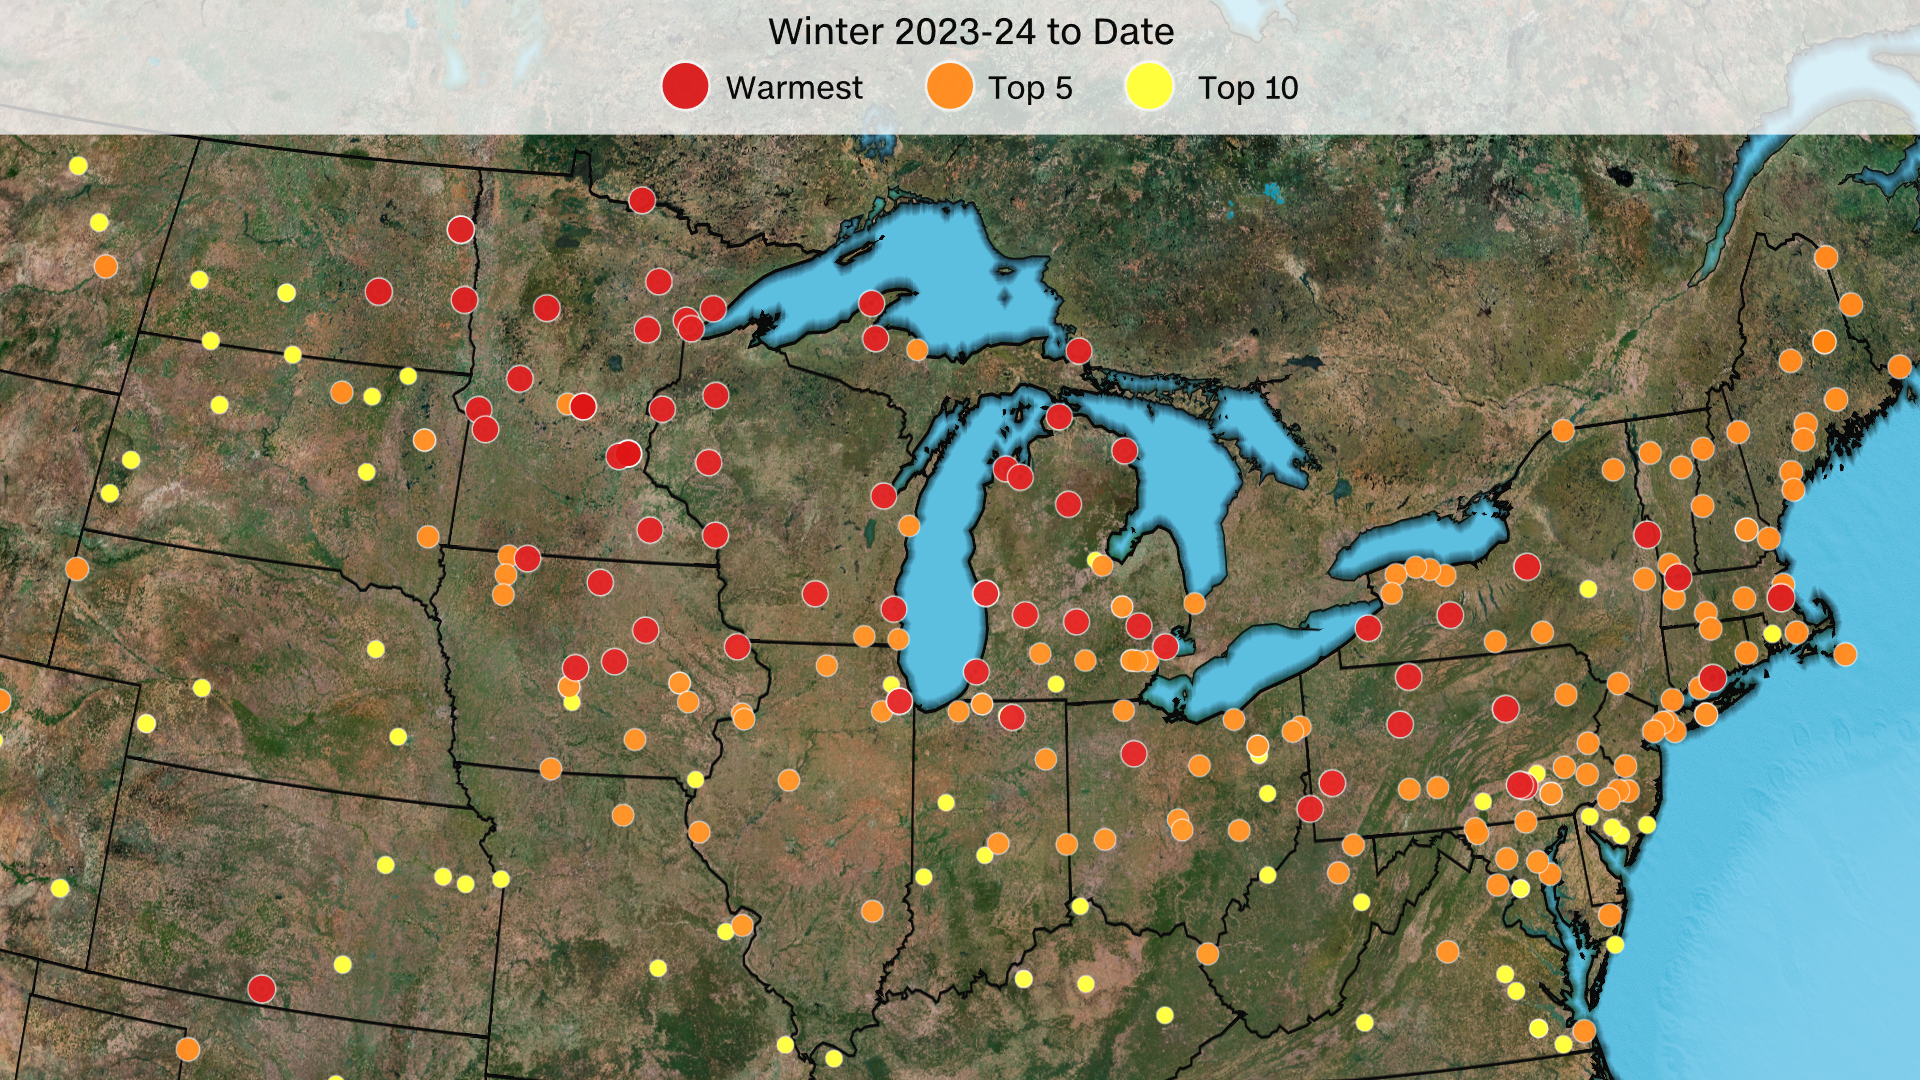 Vanishing ice and snow: record warm winter wreaks havoc across US midwest, Climate crisis